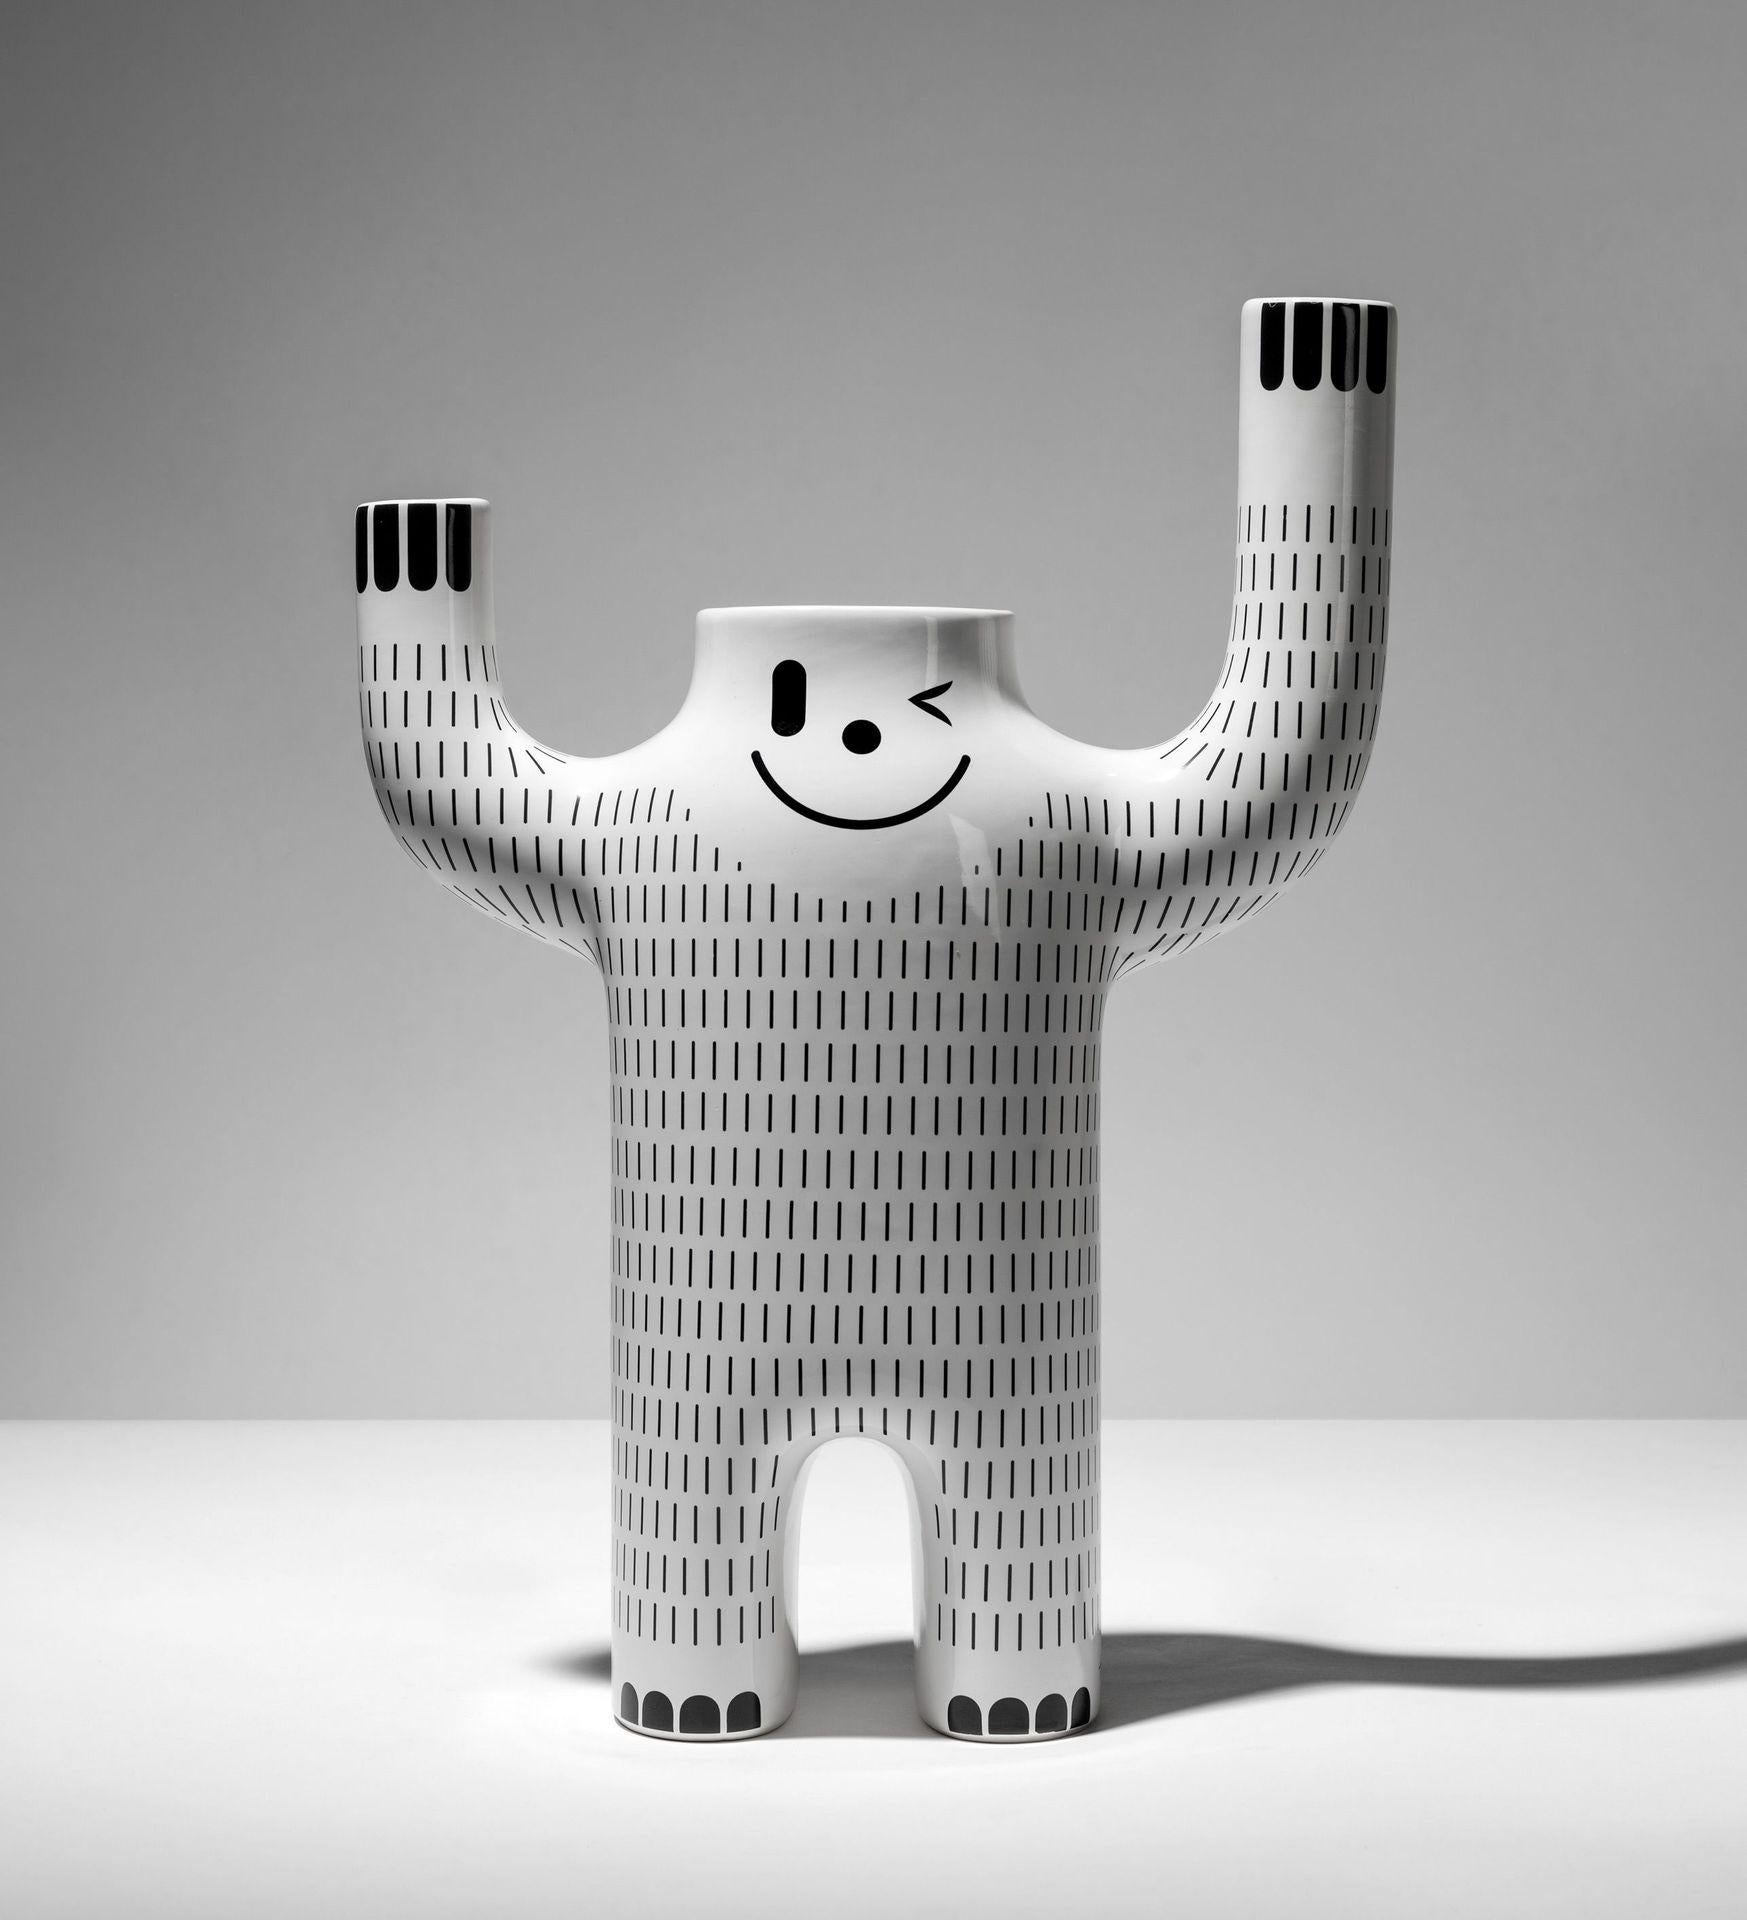 Large Happy Yeti vase by Jaime Hayon 
Dimensions: D 14 x W 33 x H 47 cm 
Materials: Glazed ceramic vase in white with decorations in black.
Also available in size Small.


From when I was little, I always found the Yeti story funny - that snow